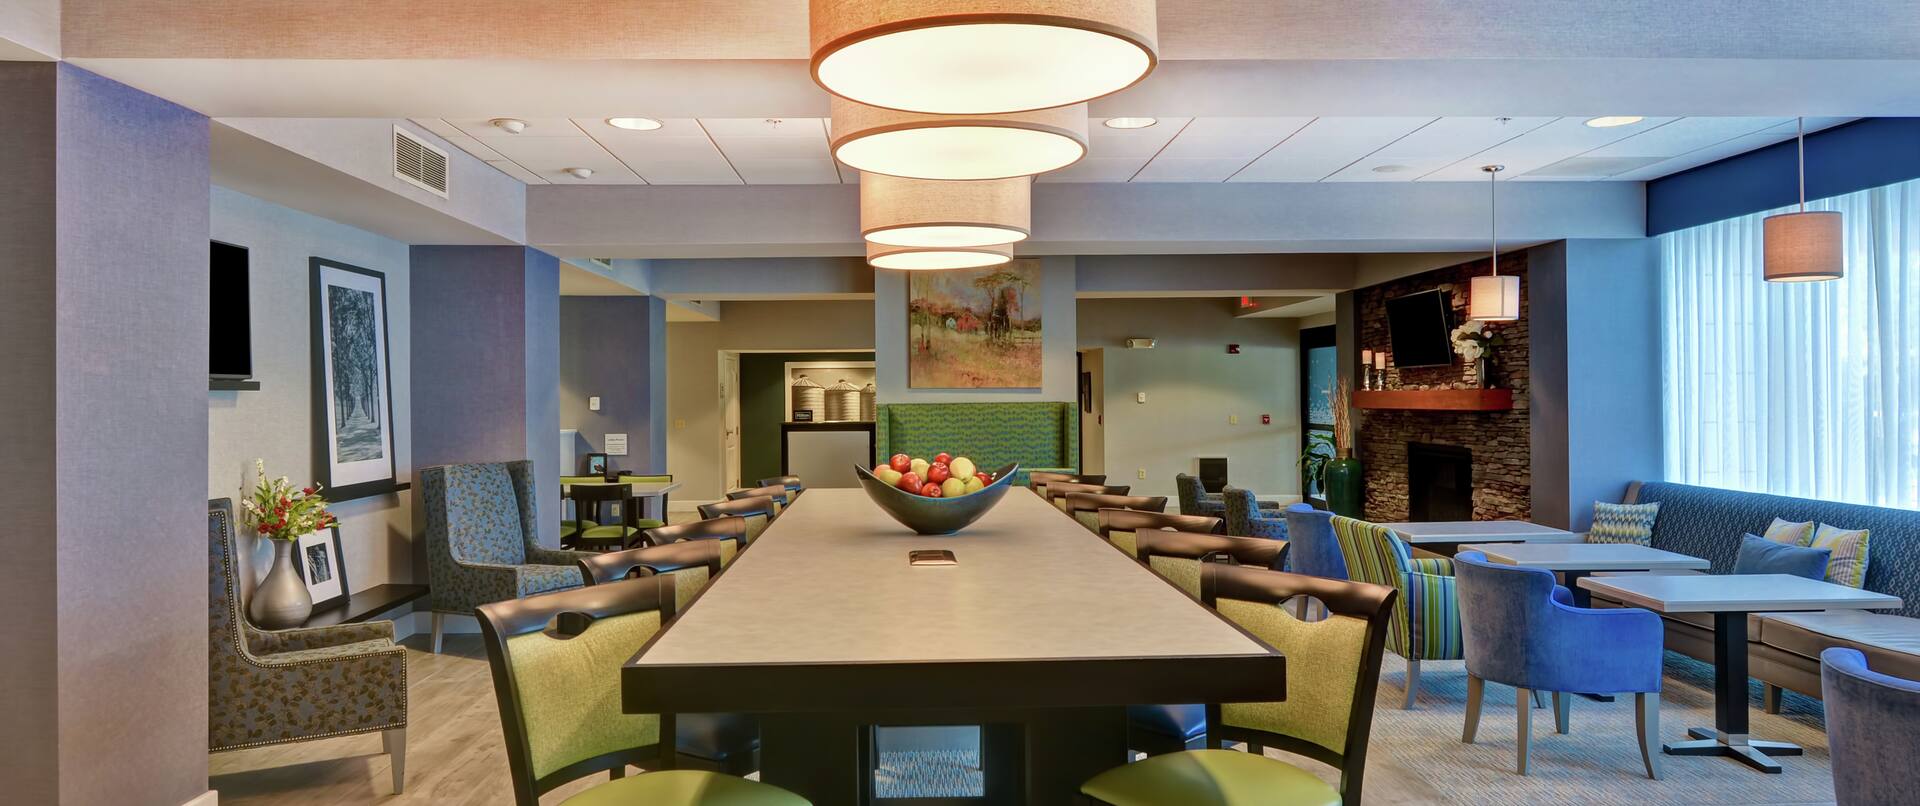 Hotel Lobby with Large Communal Table